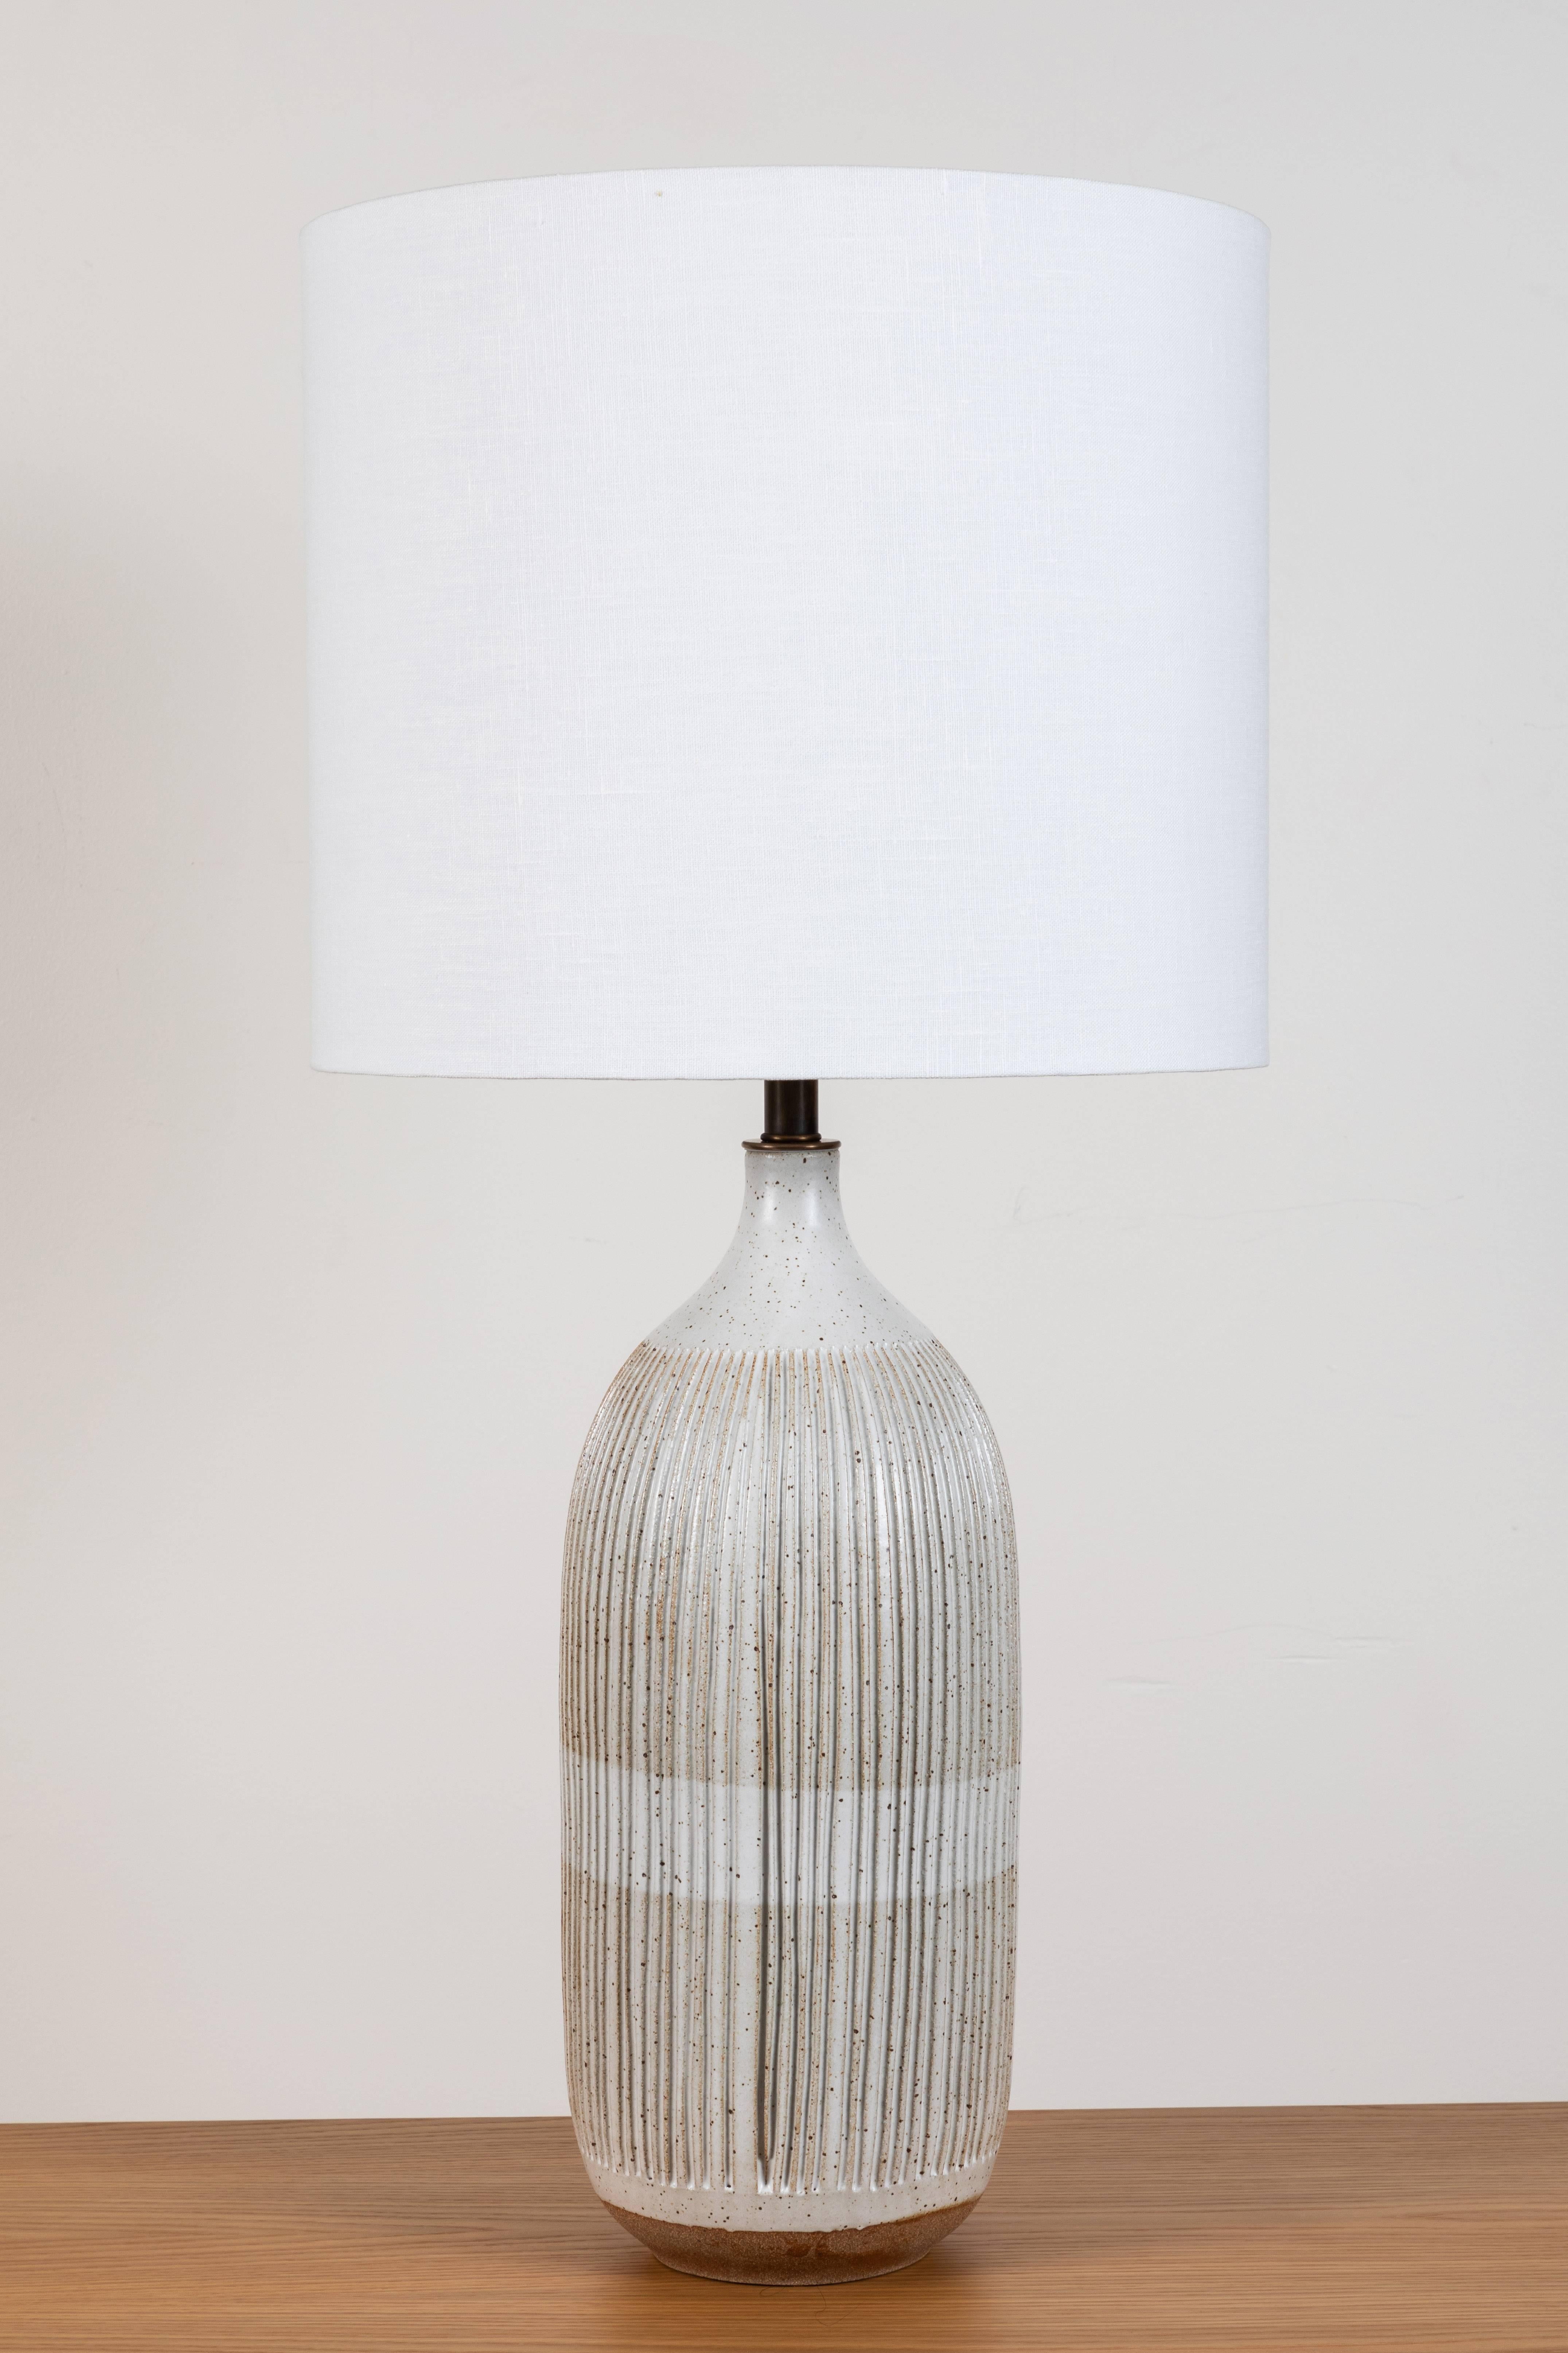 Contemporary Pair of Striped Bottle Lamps by Mt. Washington for Lawson-Fenning